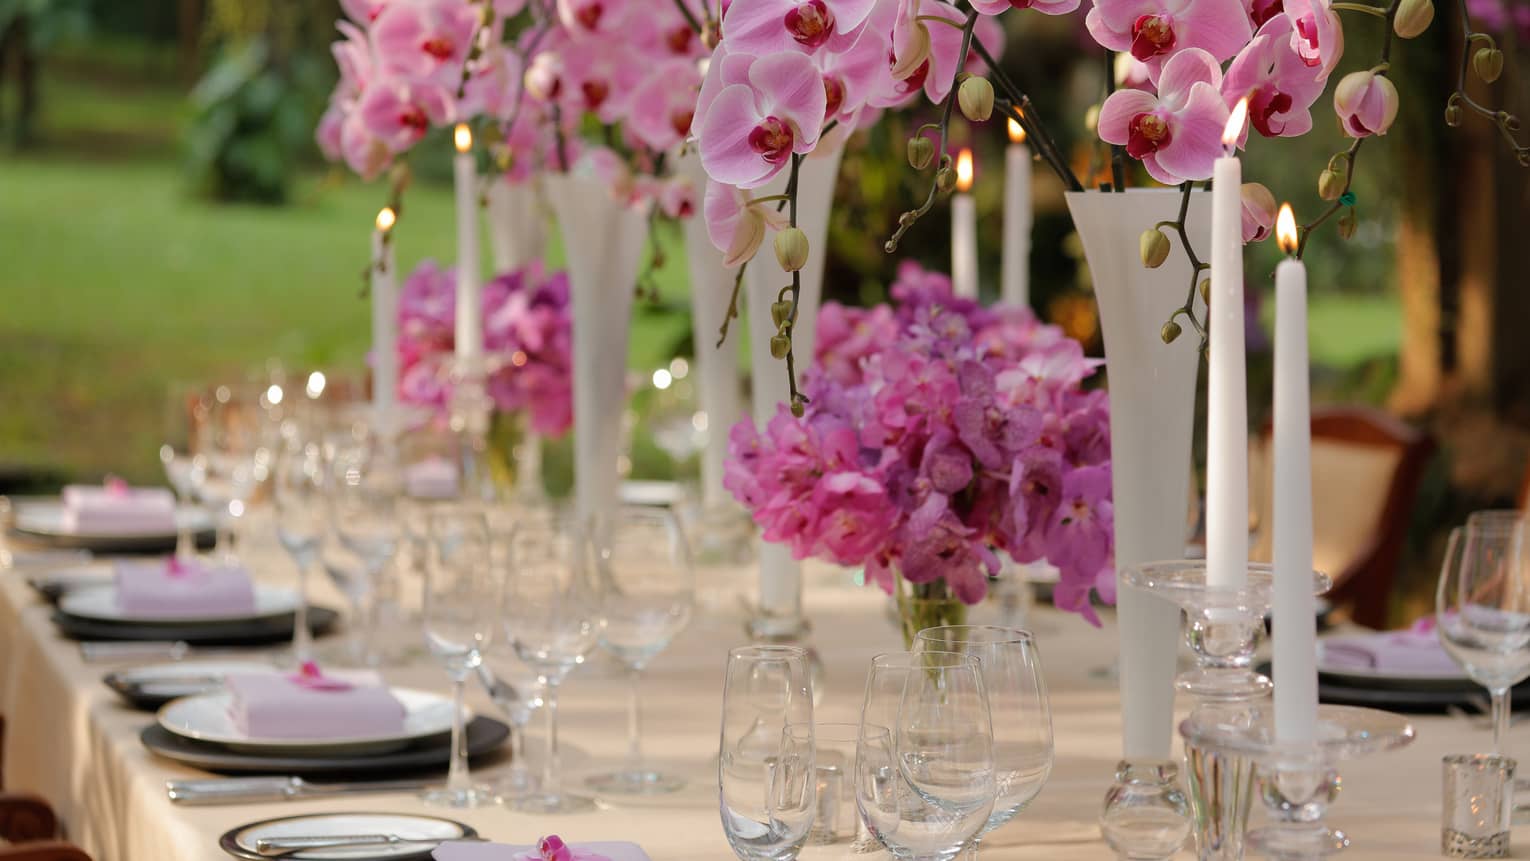 Outdoor dining table with pink flowers in vases, tall white candles 